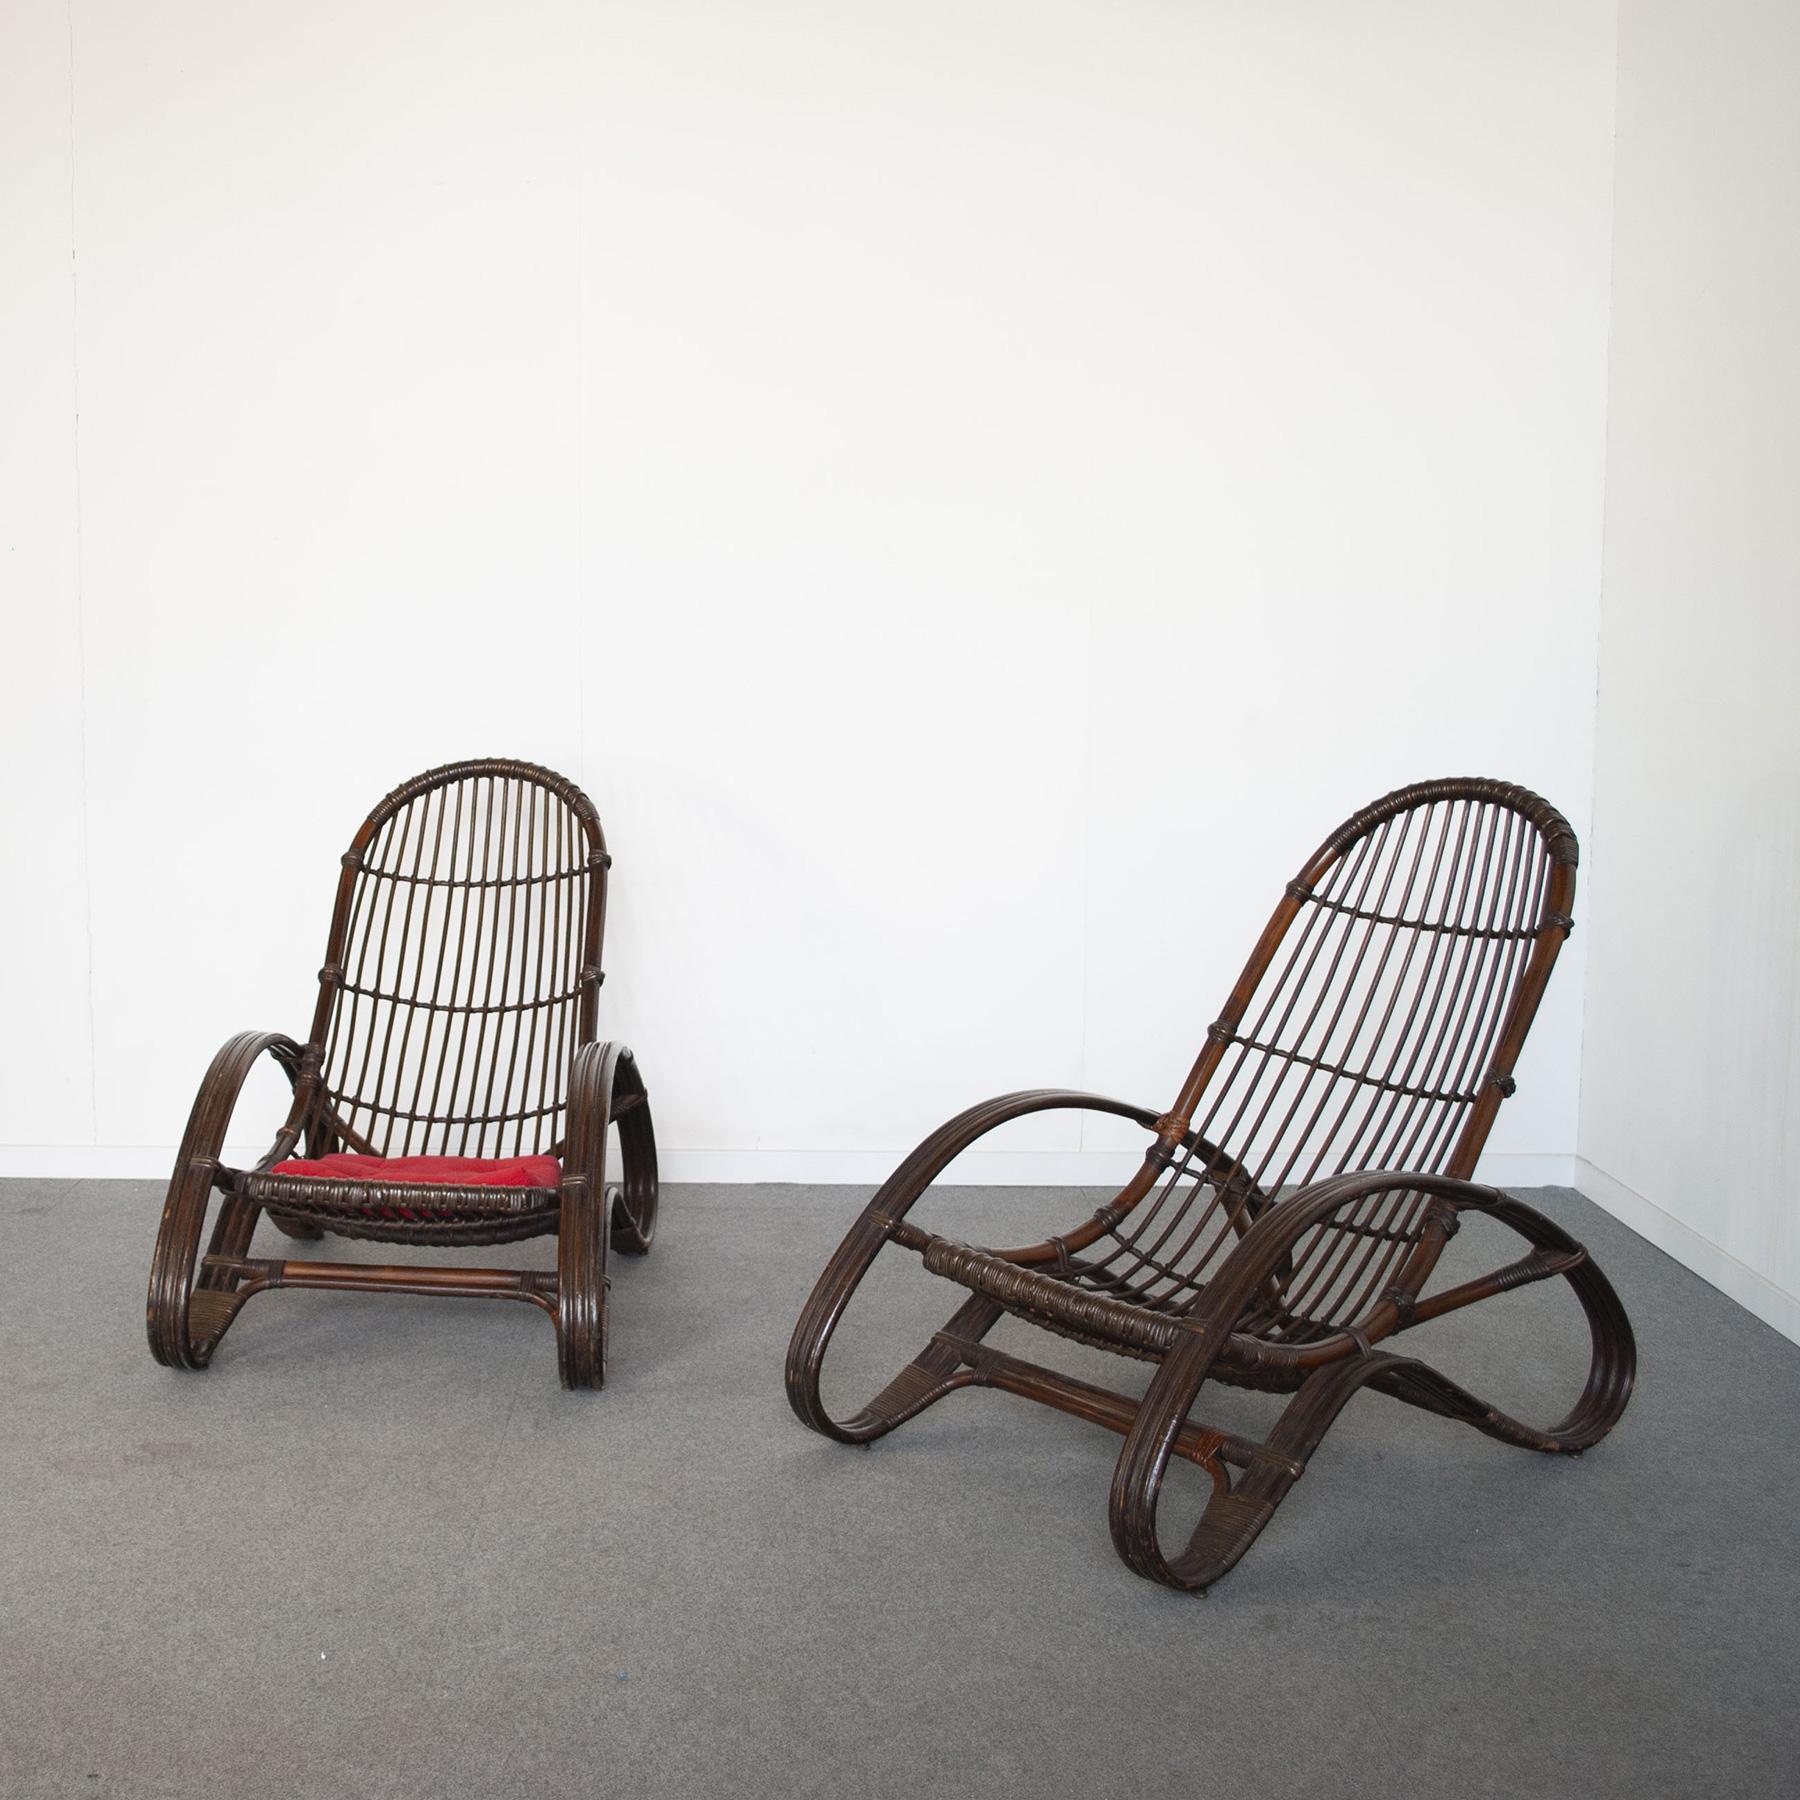 Pair of guinea cane wicker relaxation armchairs, Italian production 1960s.